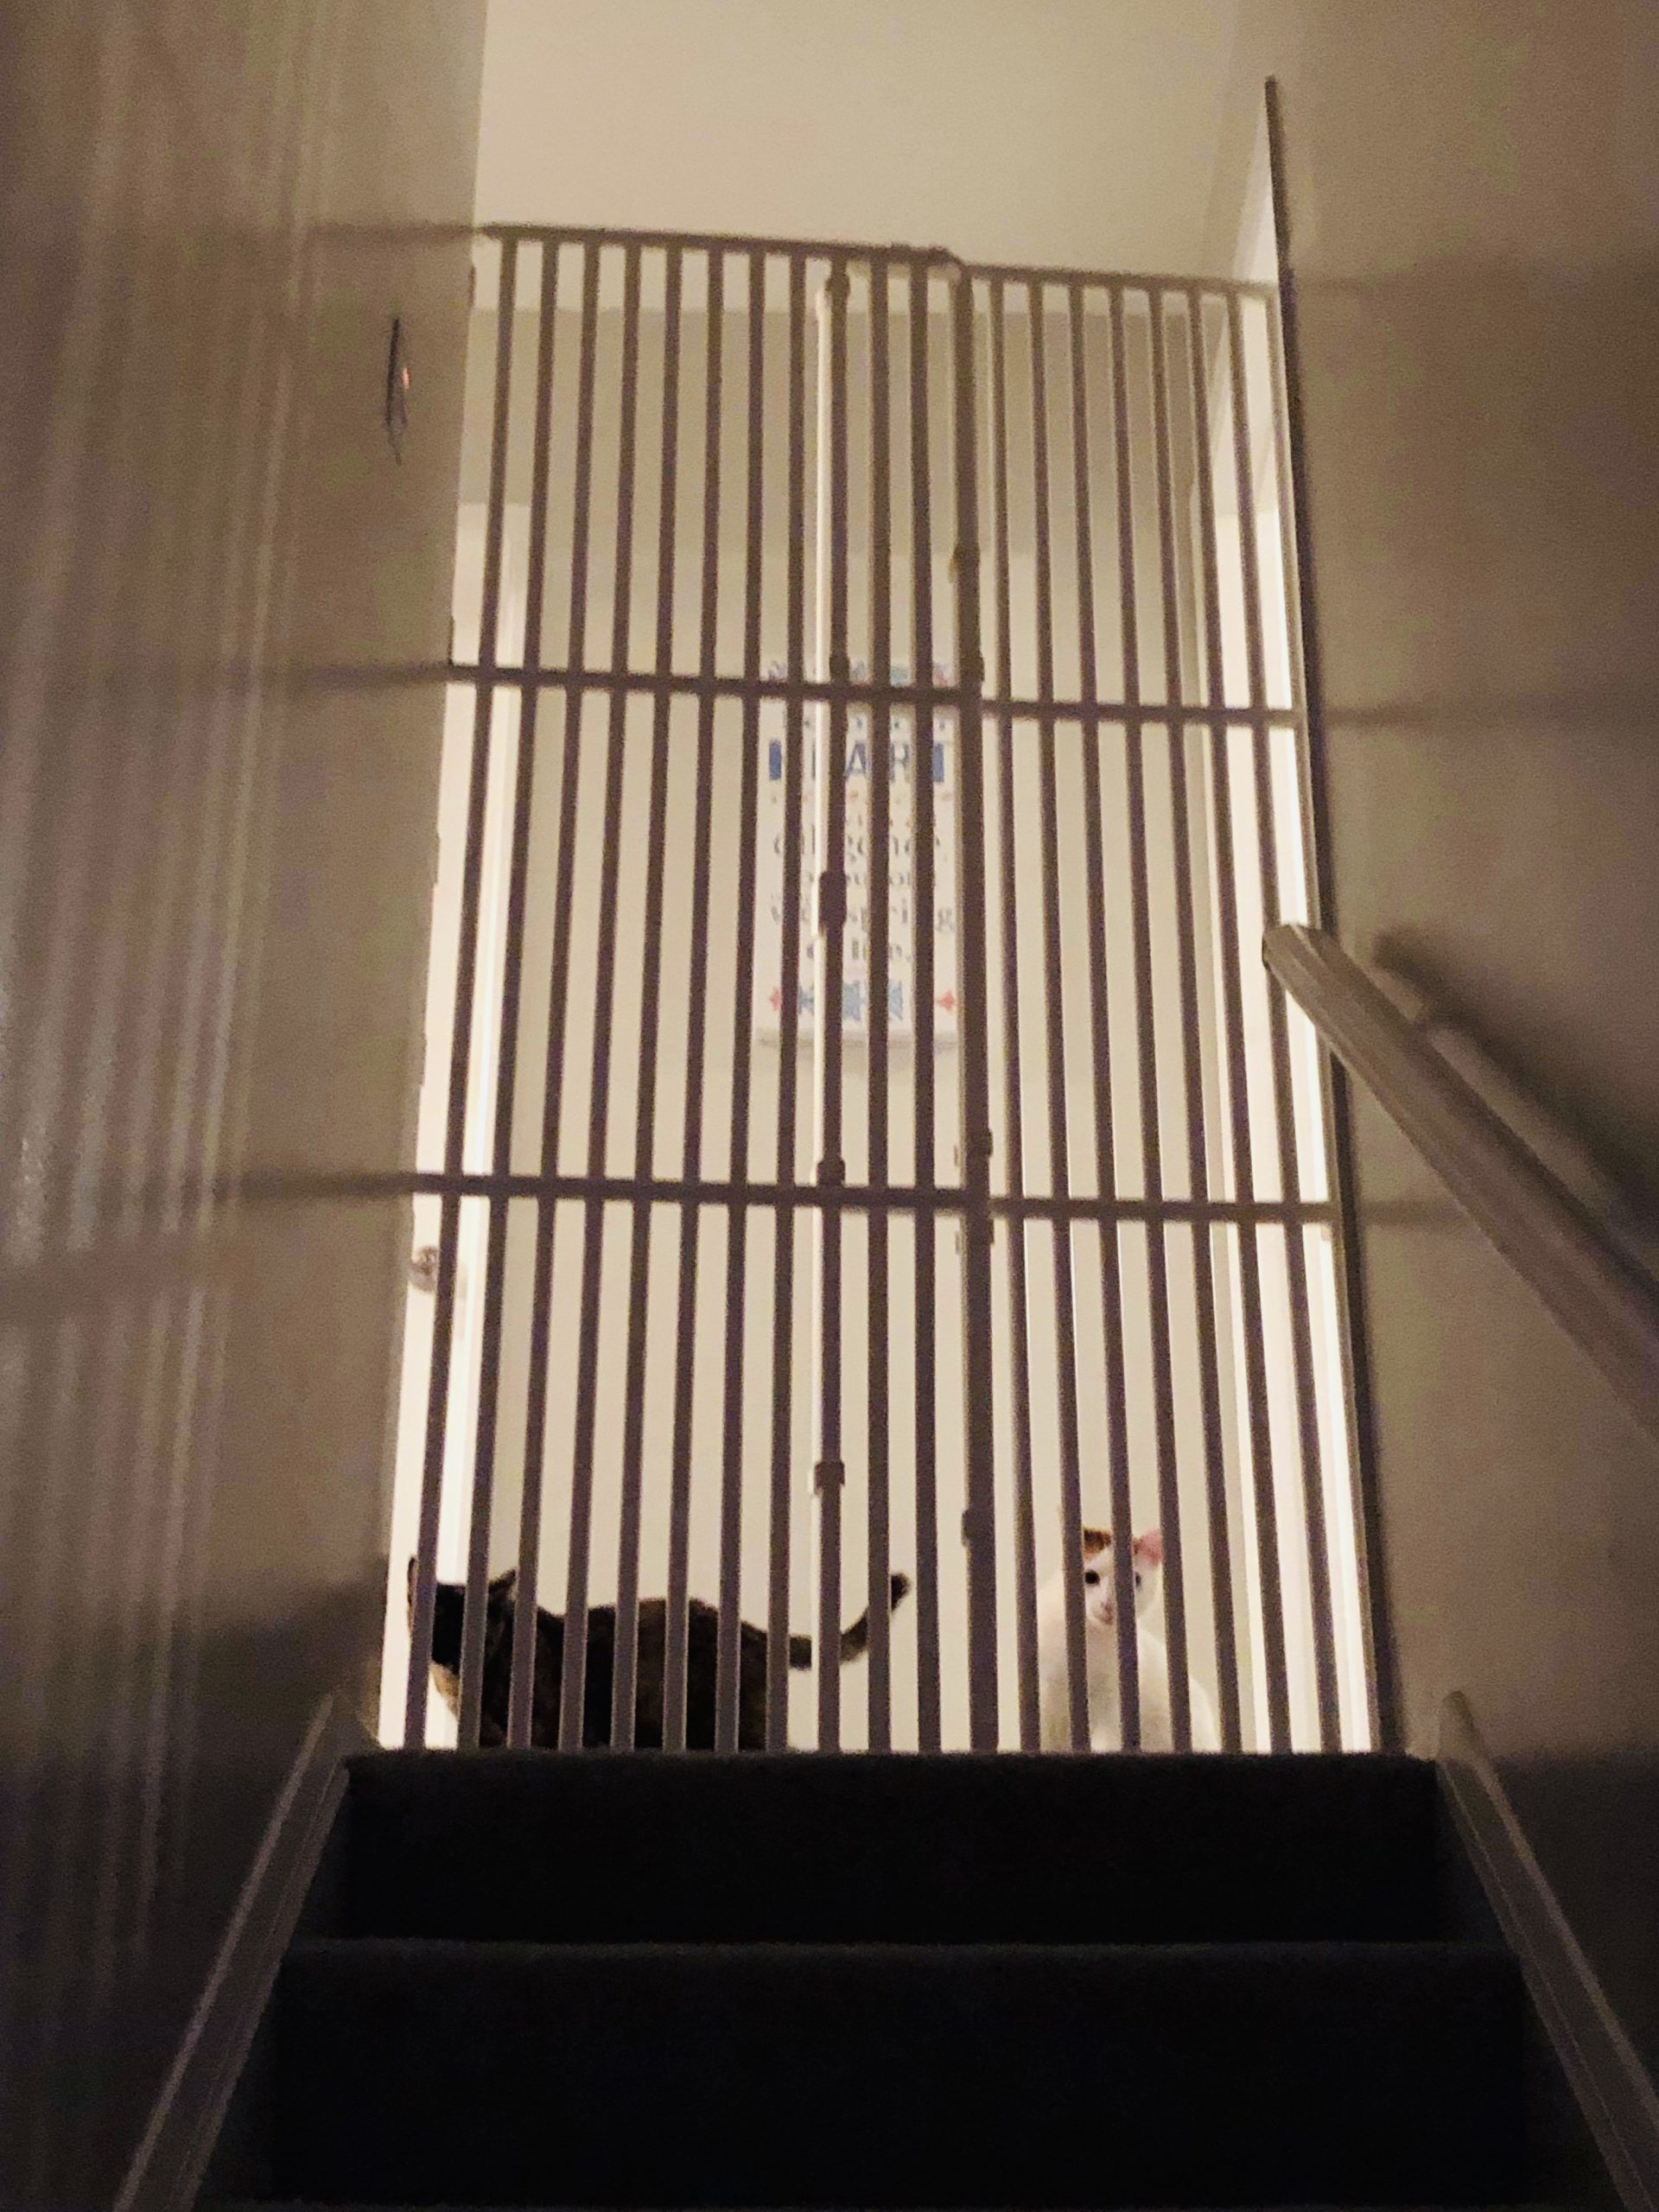 pet gate for stairs cat